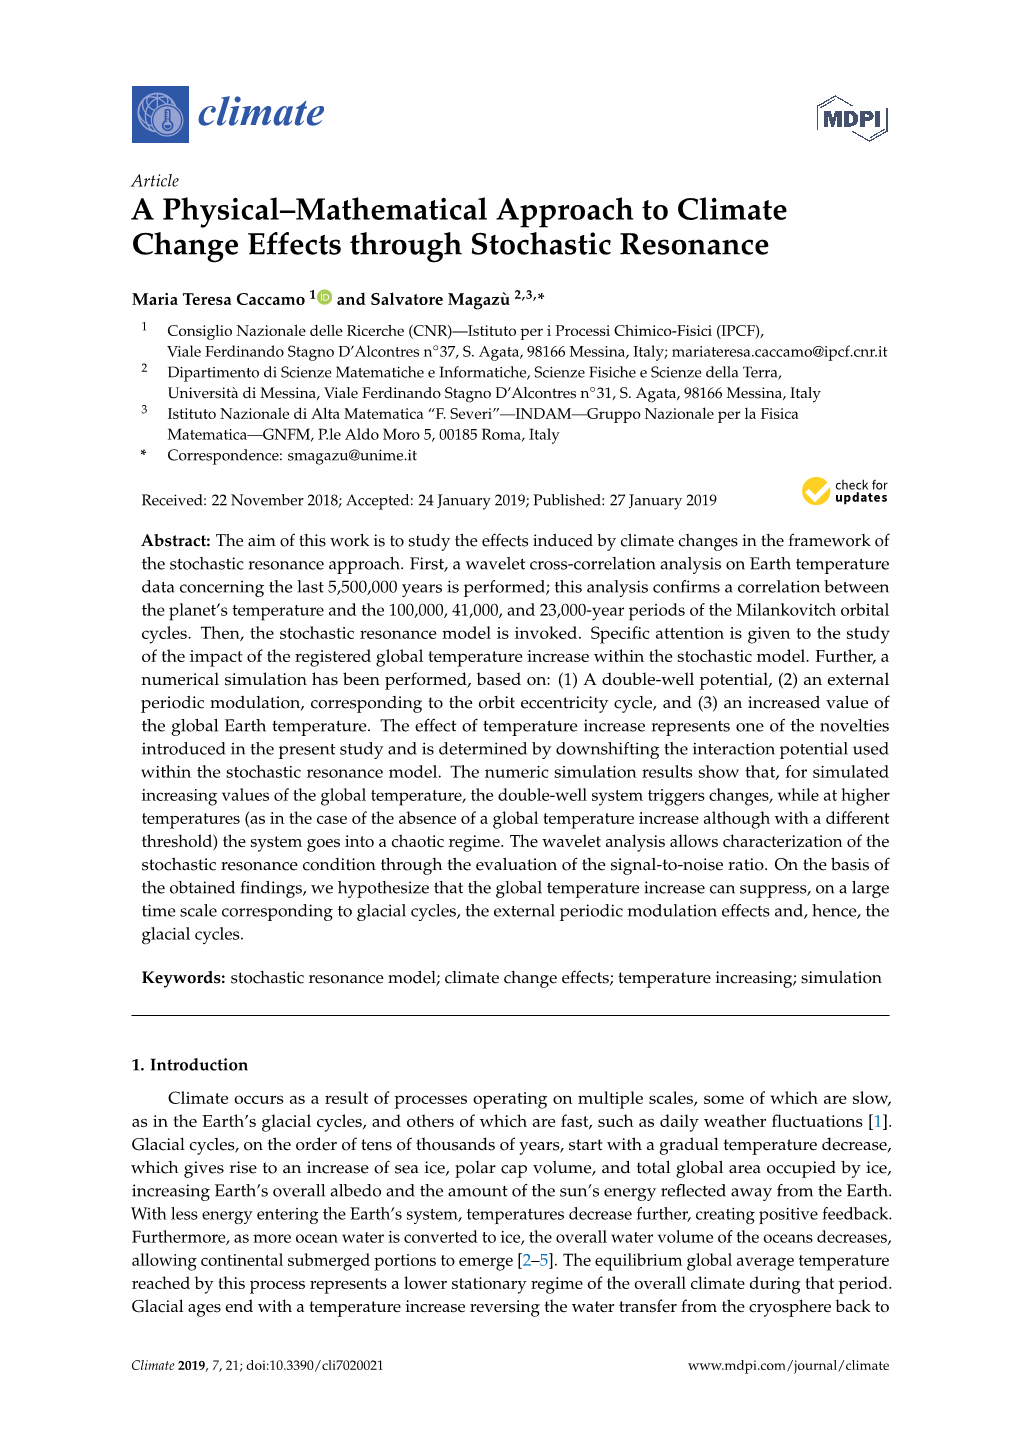 A Physical–Mathematical Approach to Climate Change Effects Through Stochastic Resonance